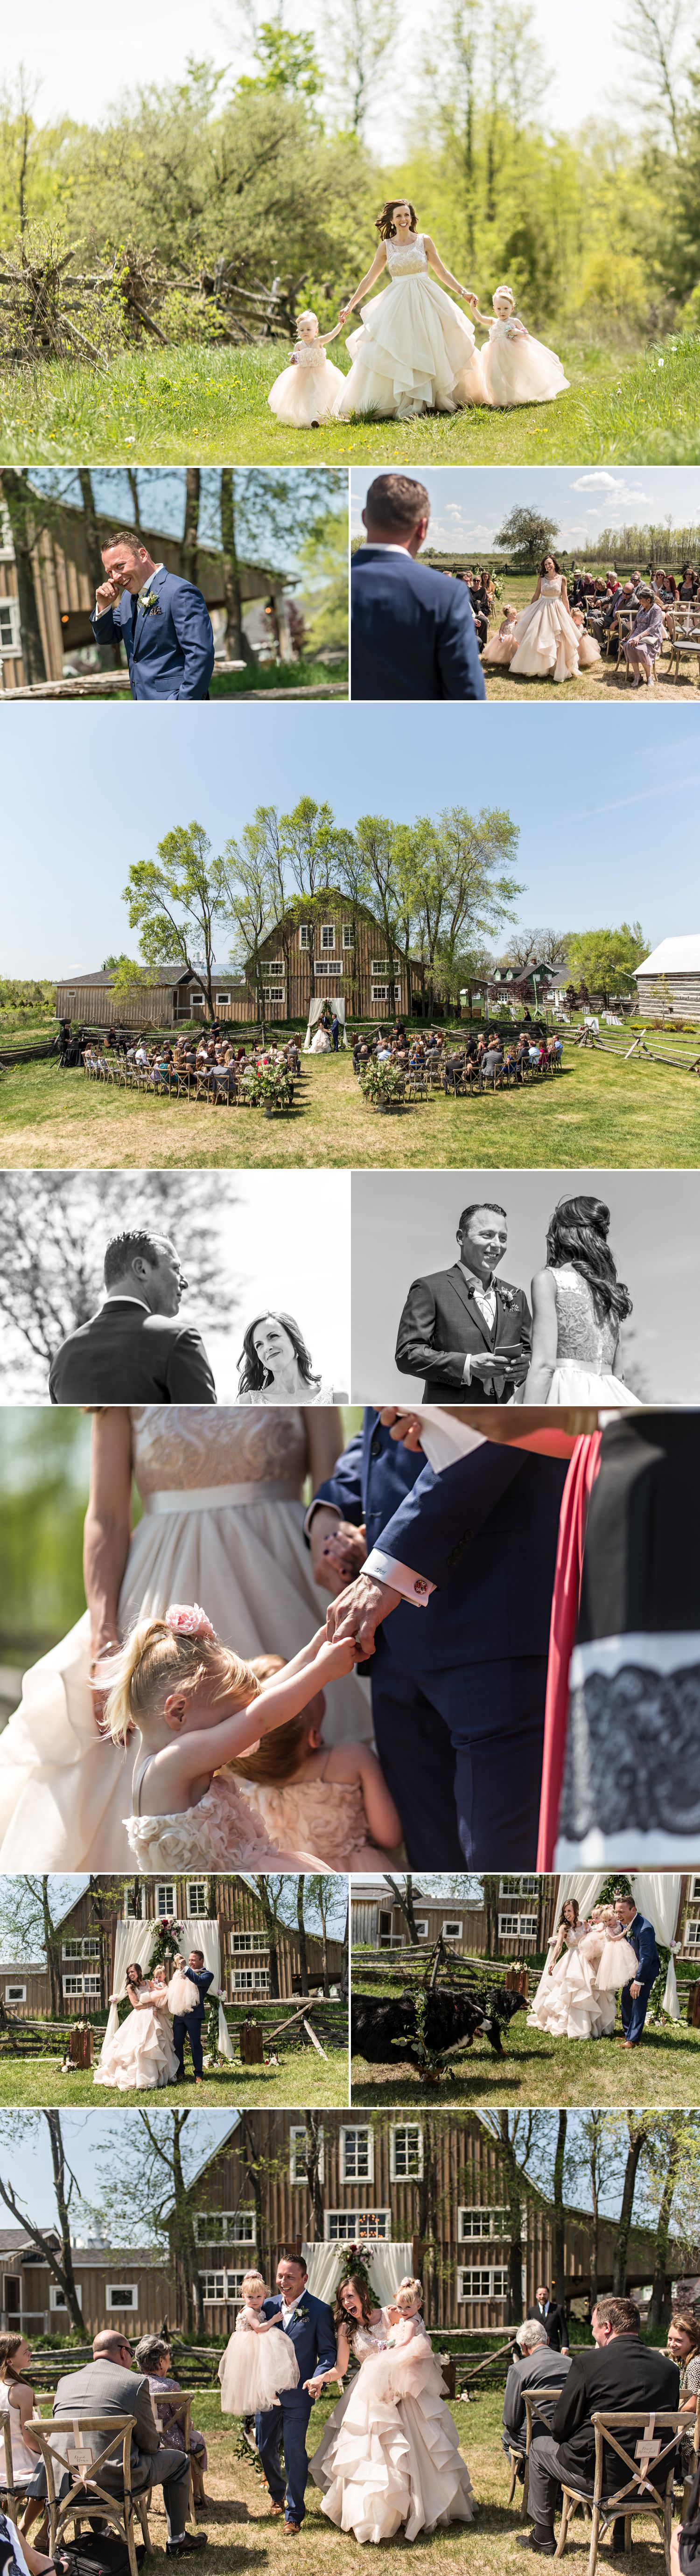 candid moments at stephanie steve wedding ceremony at stonefields heritage new barn